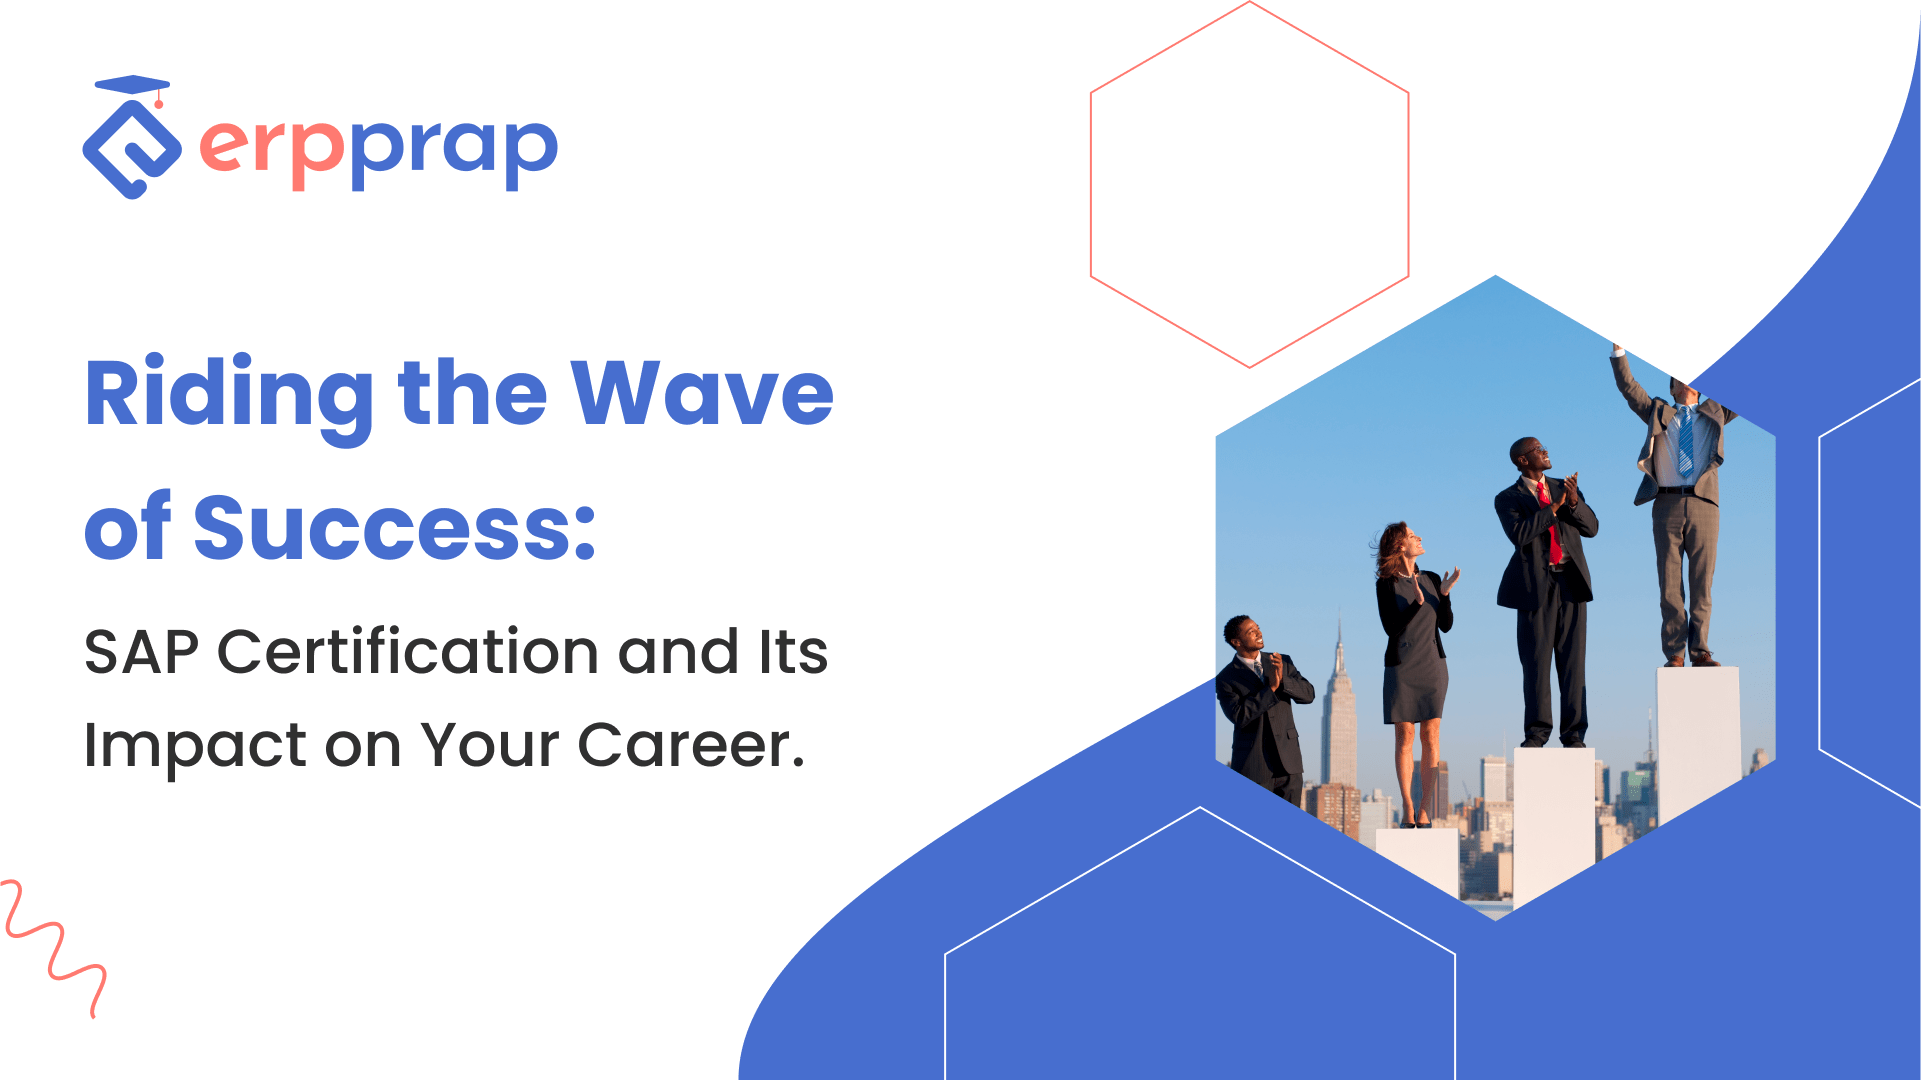 Riding the Wave of Success SAP Certification and Its Impact on Your Career